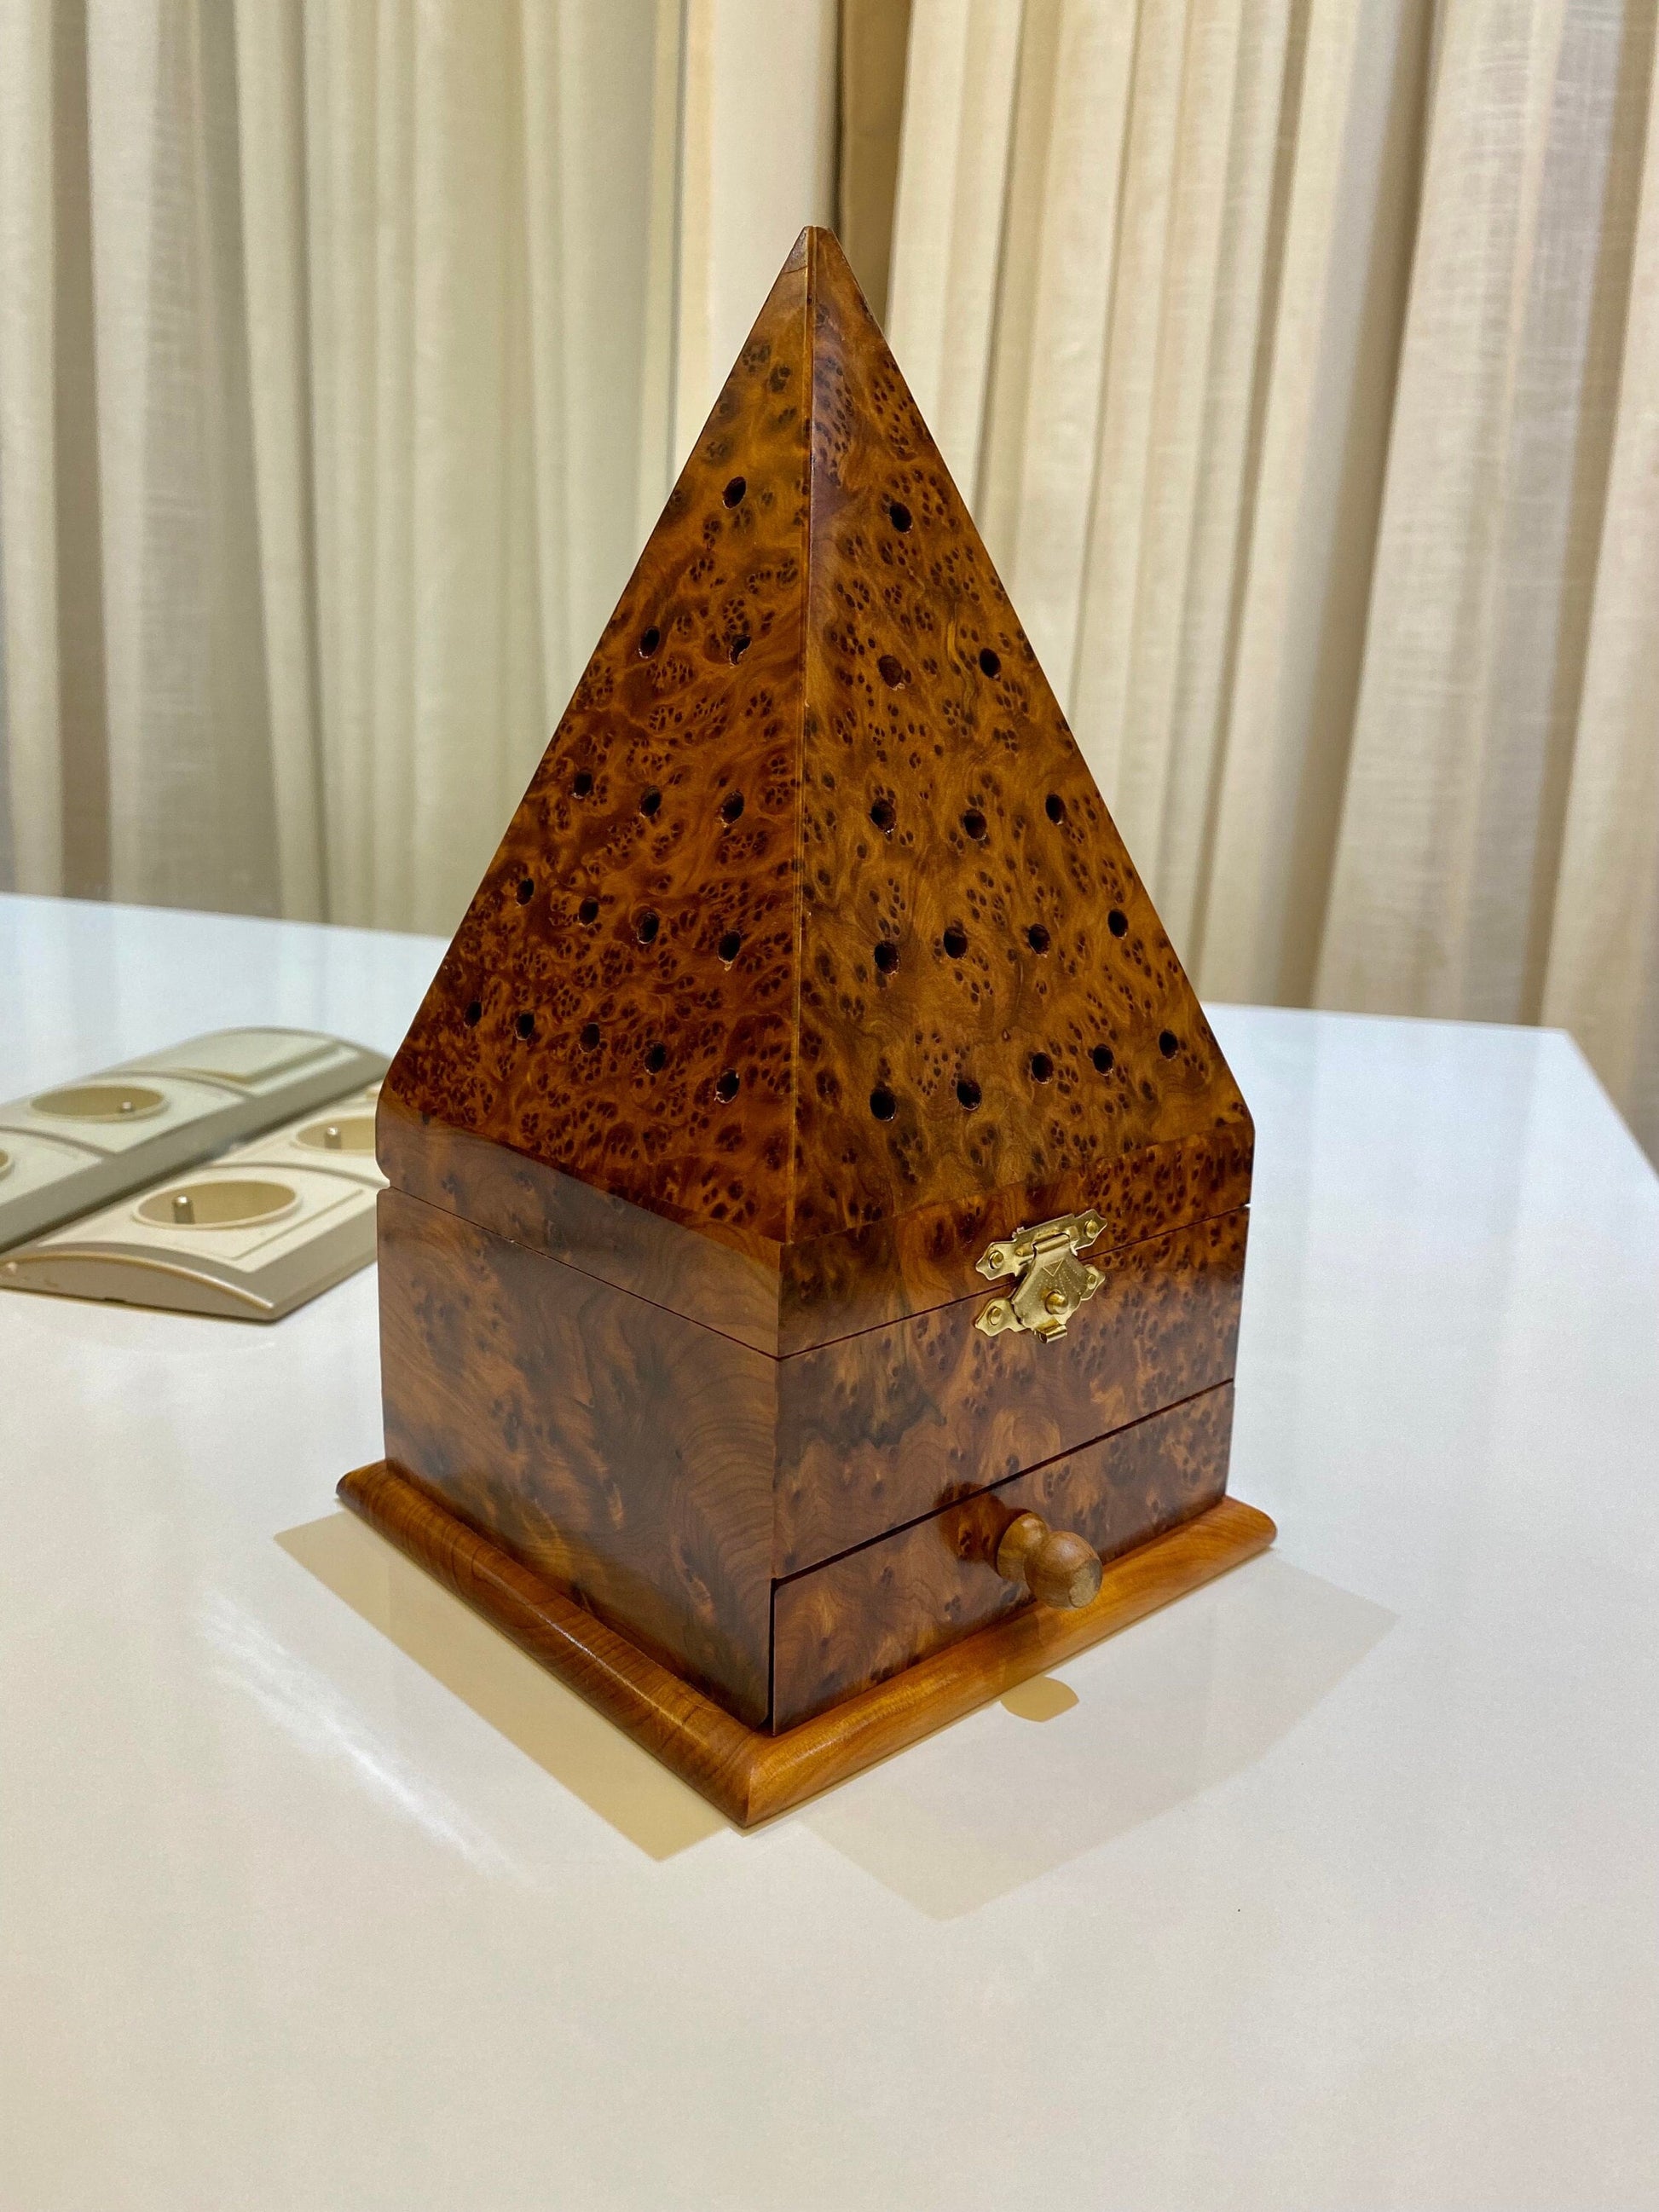 4"x4" Moroccan Handcrafted Pyramid thuya Wood Incense Burner with Slow Release Tub Feature,Gift idea,incense burner with drawer,home decor